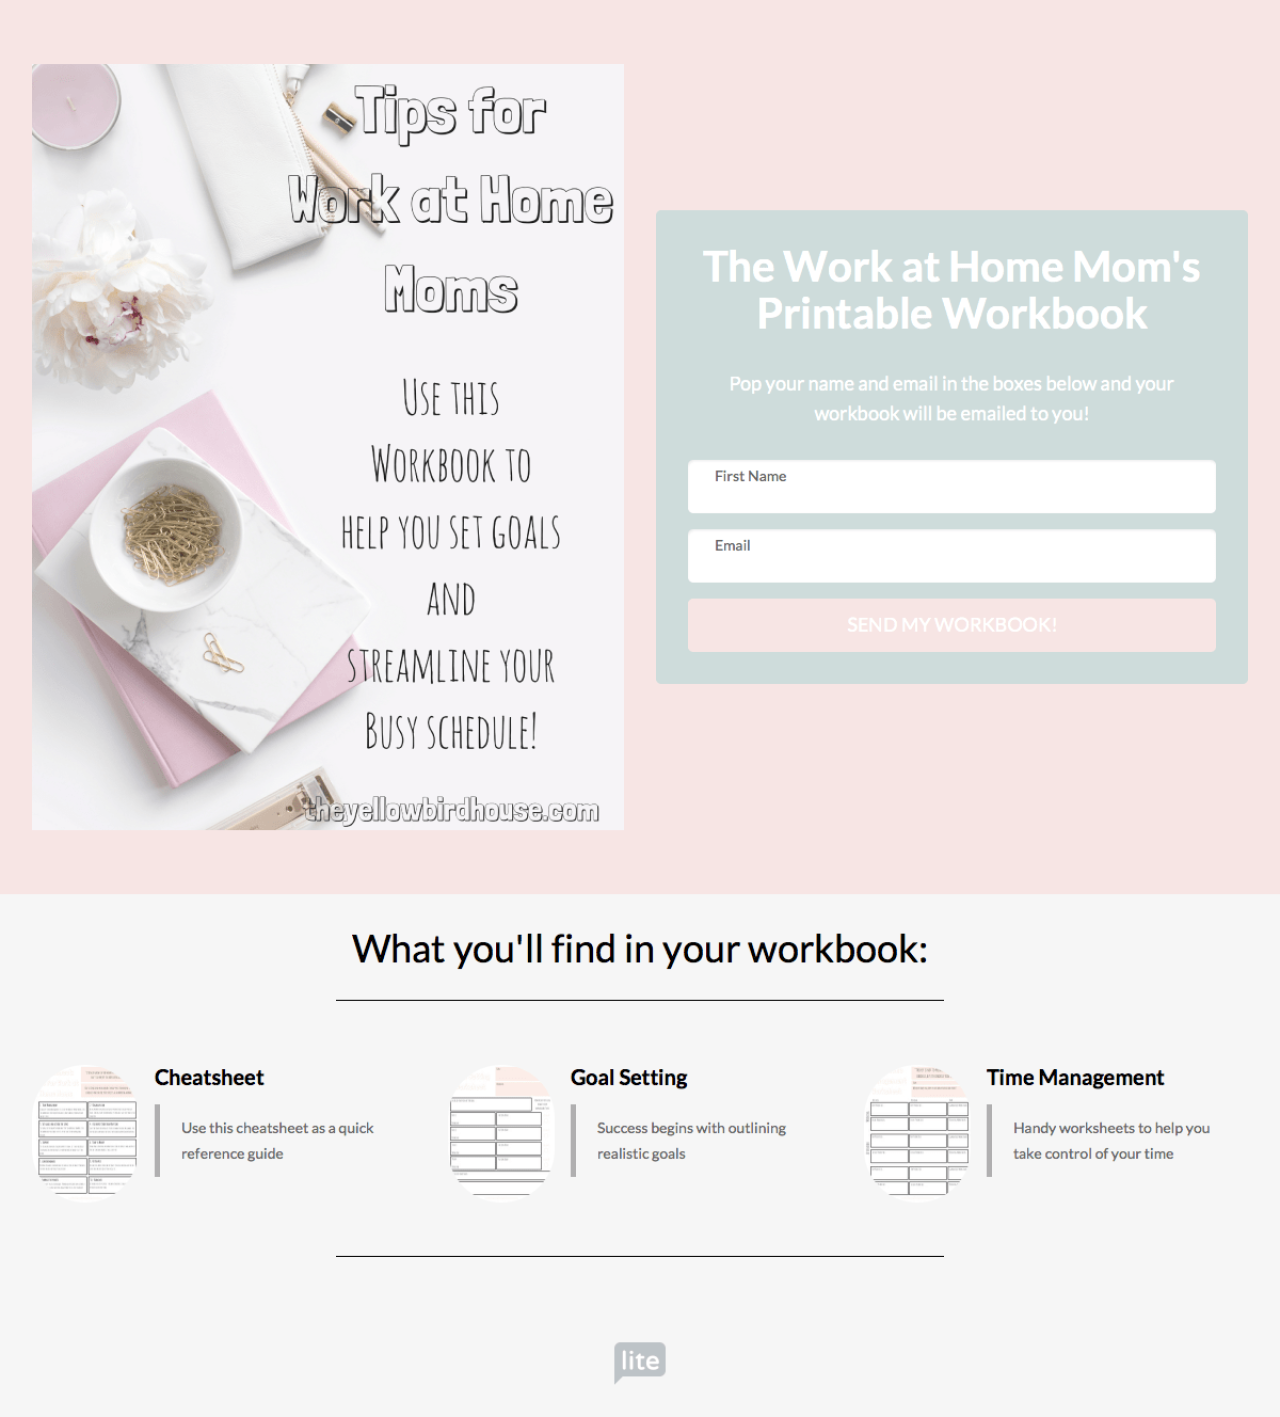 Tips for Working Moms example - Made with MailerLite